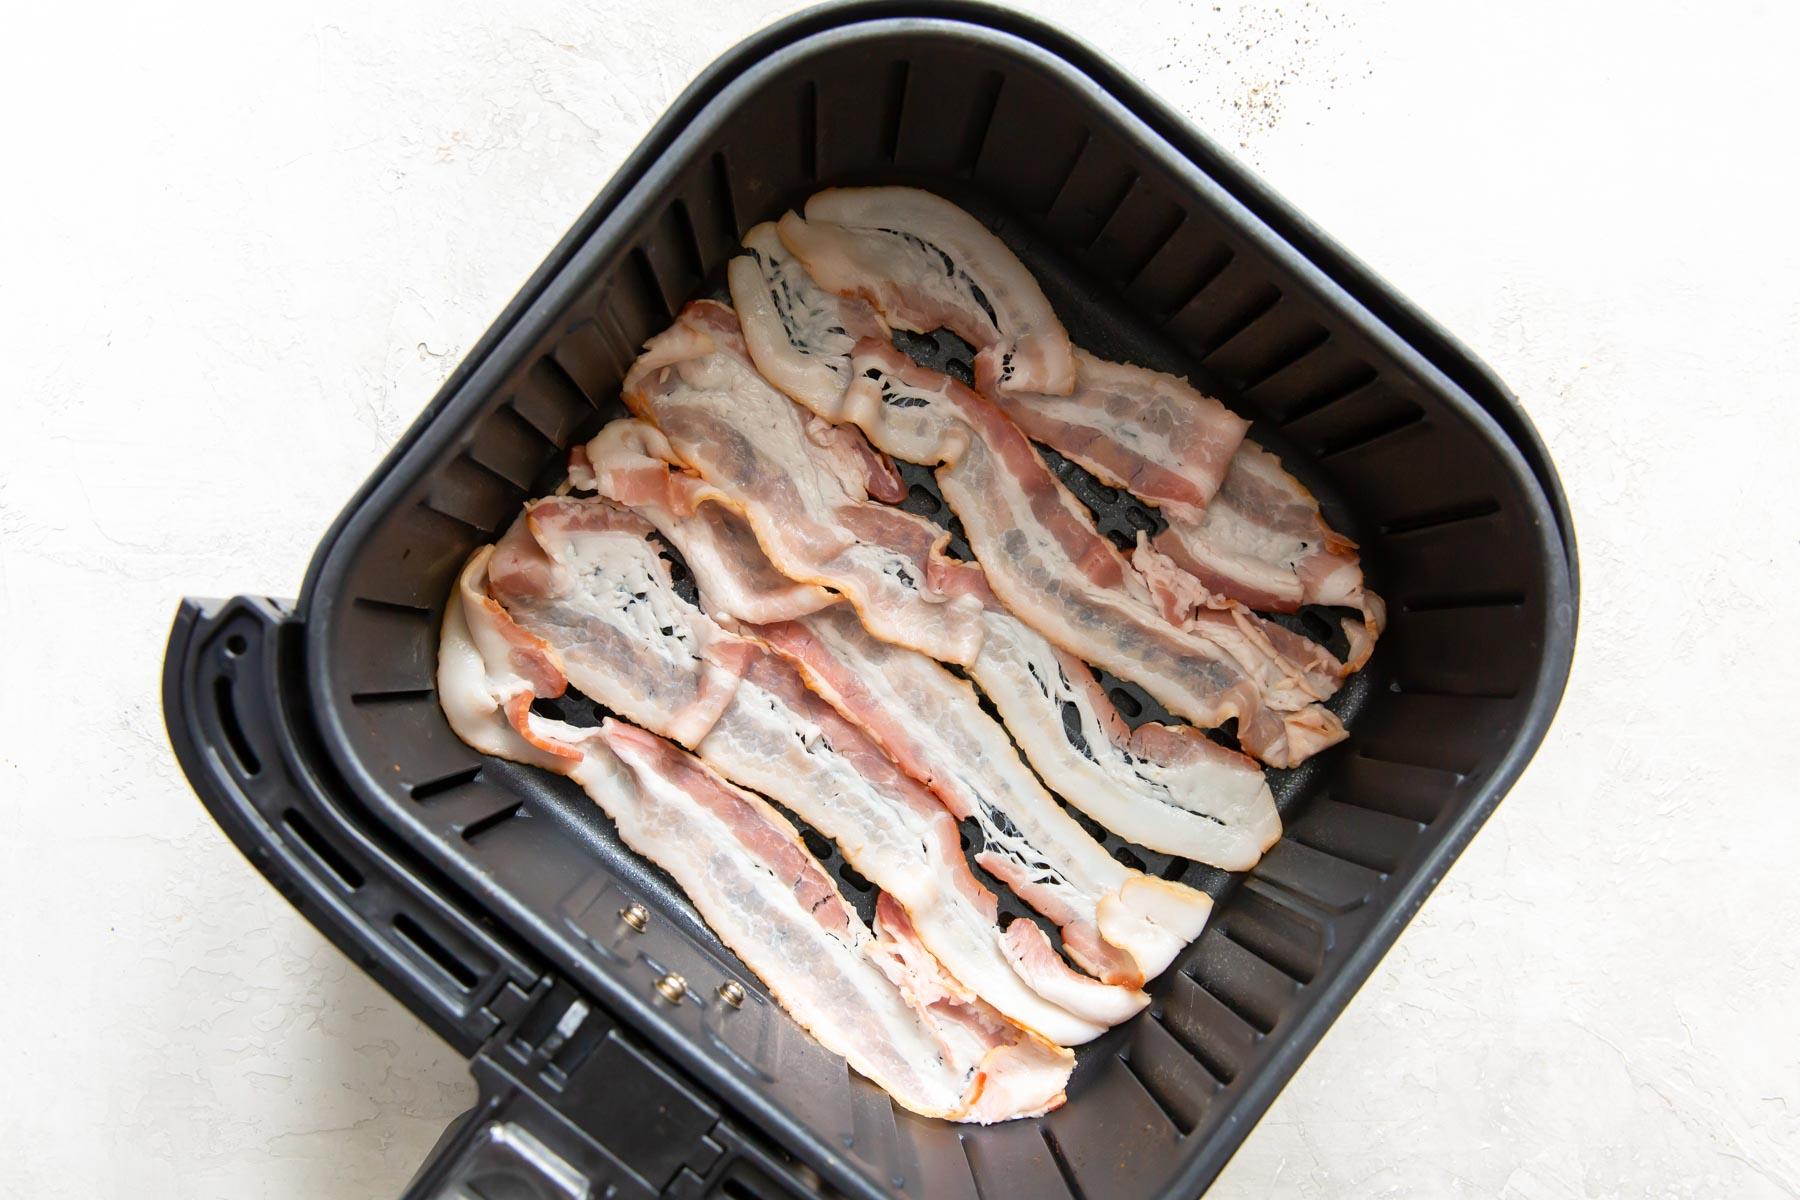 uncooked bacon slices in air fryer basket